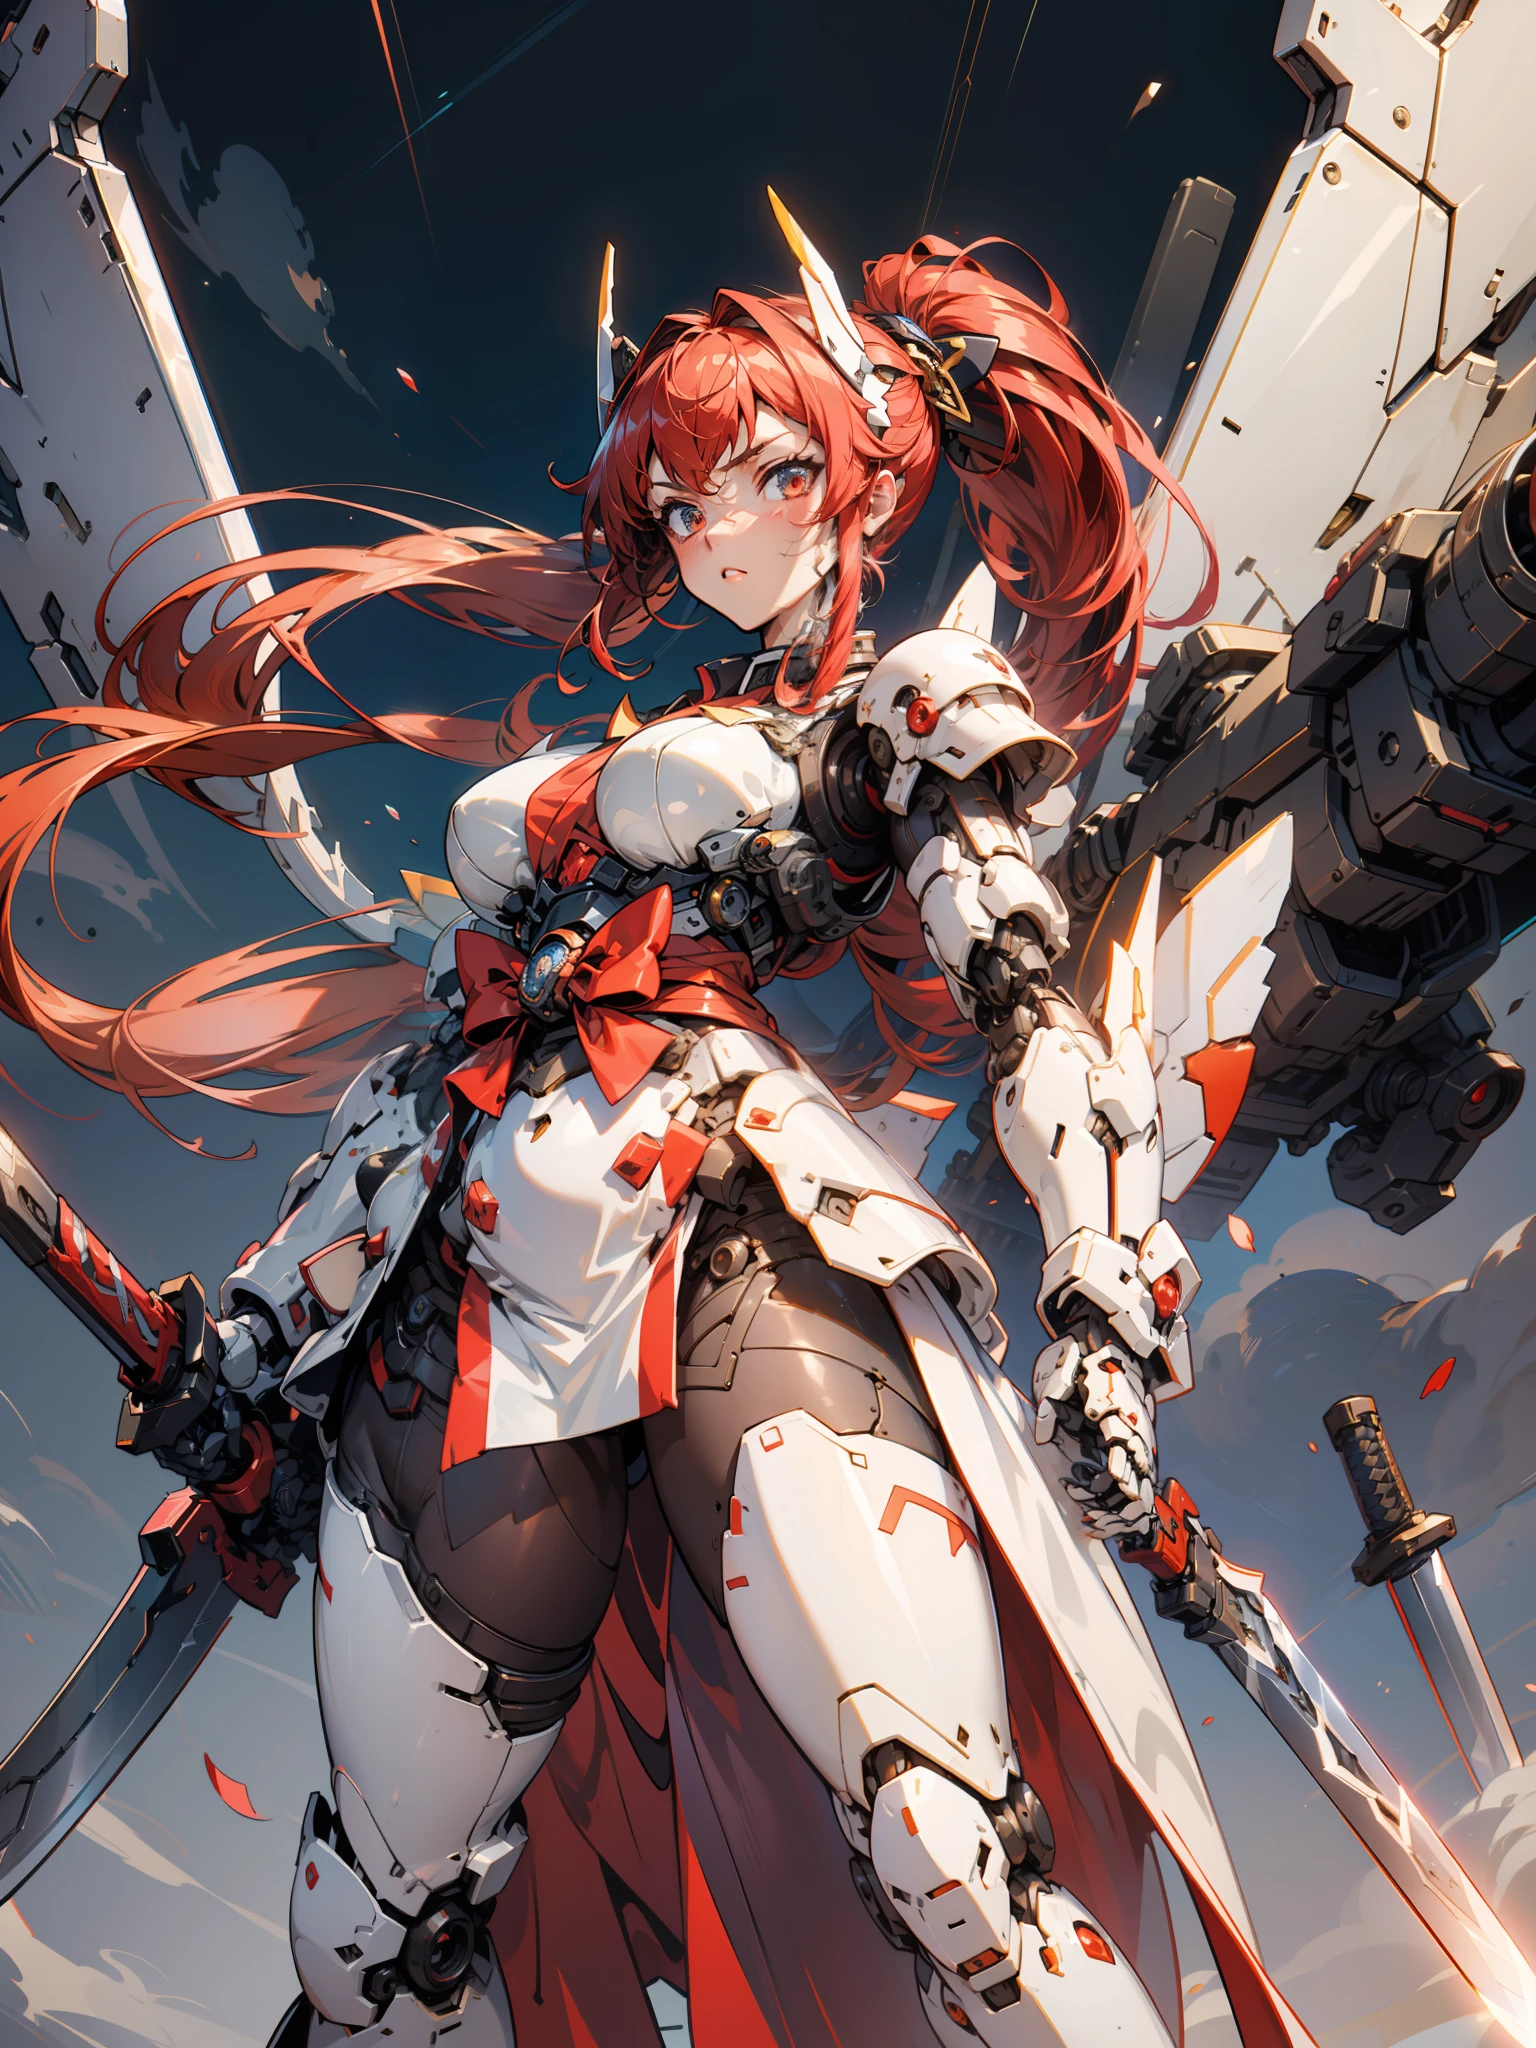 hyper quality, hyper detailed,perfect drawing,Solo, Beautiful Girl, masterpiece, (mecha musume), mechanical armor, headgear, mechanical wings, holding huge gunSamurai wielding a sword, Black Ponytail, Hair tied up with a large red ribbon, Equipped with two Japan swords ((extra huge oversize cool samurai_sword in hands, extra huge cool weapon machine)), open stance, action pose,purgatory,